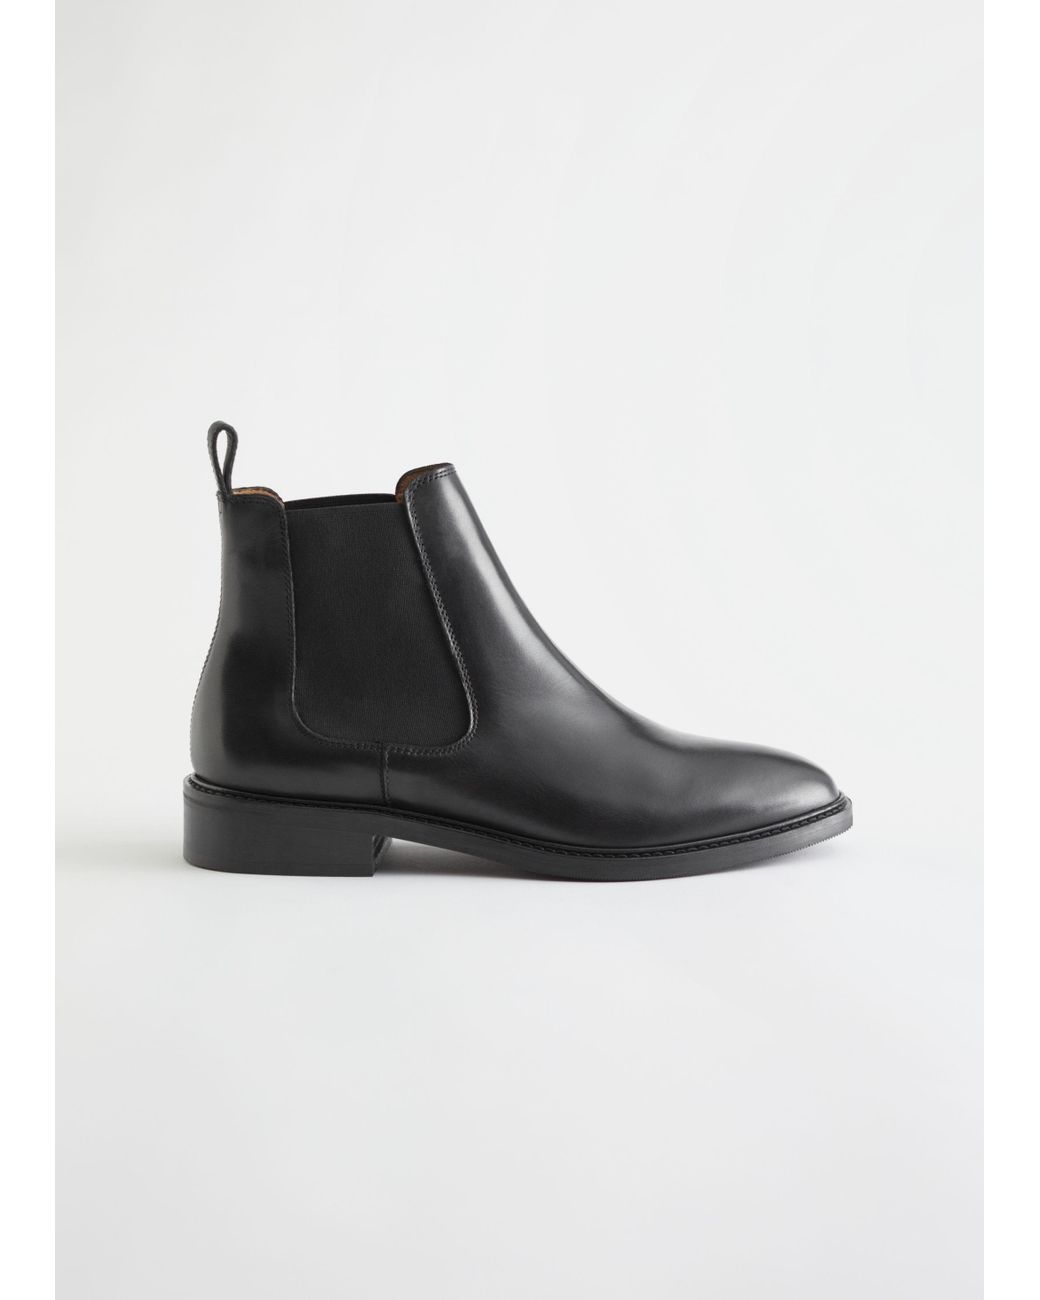 & Other Stories Almond Toe Leather Chelsea Boots in Black - Lyst